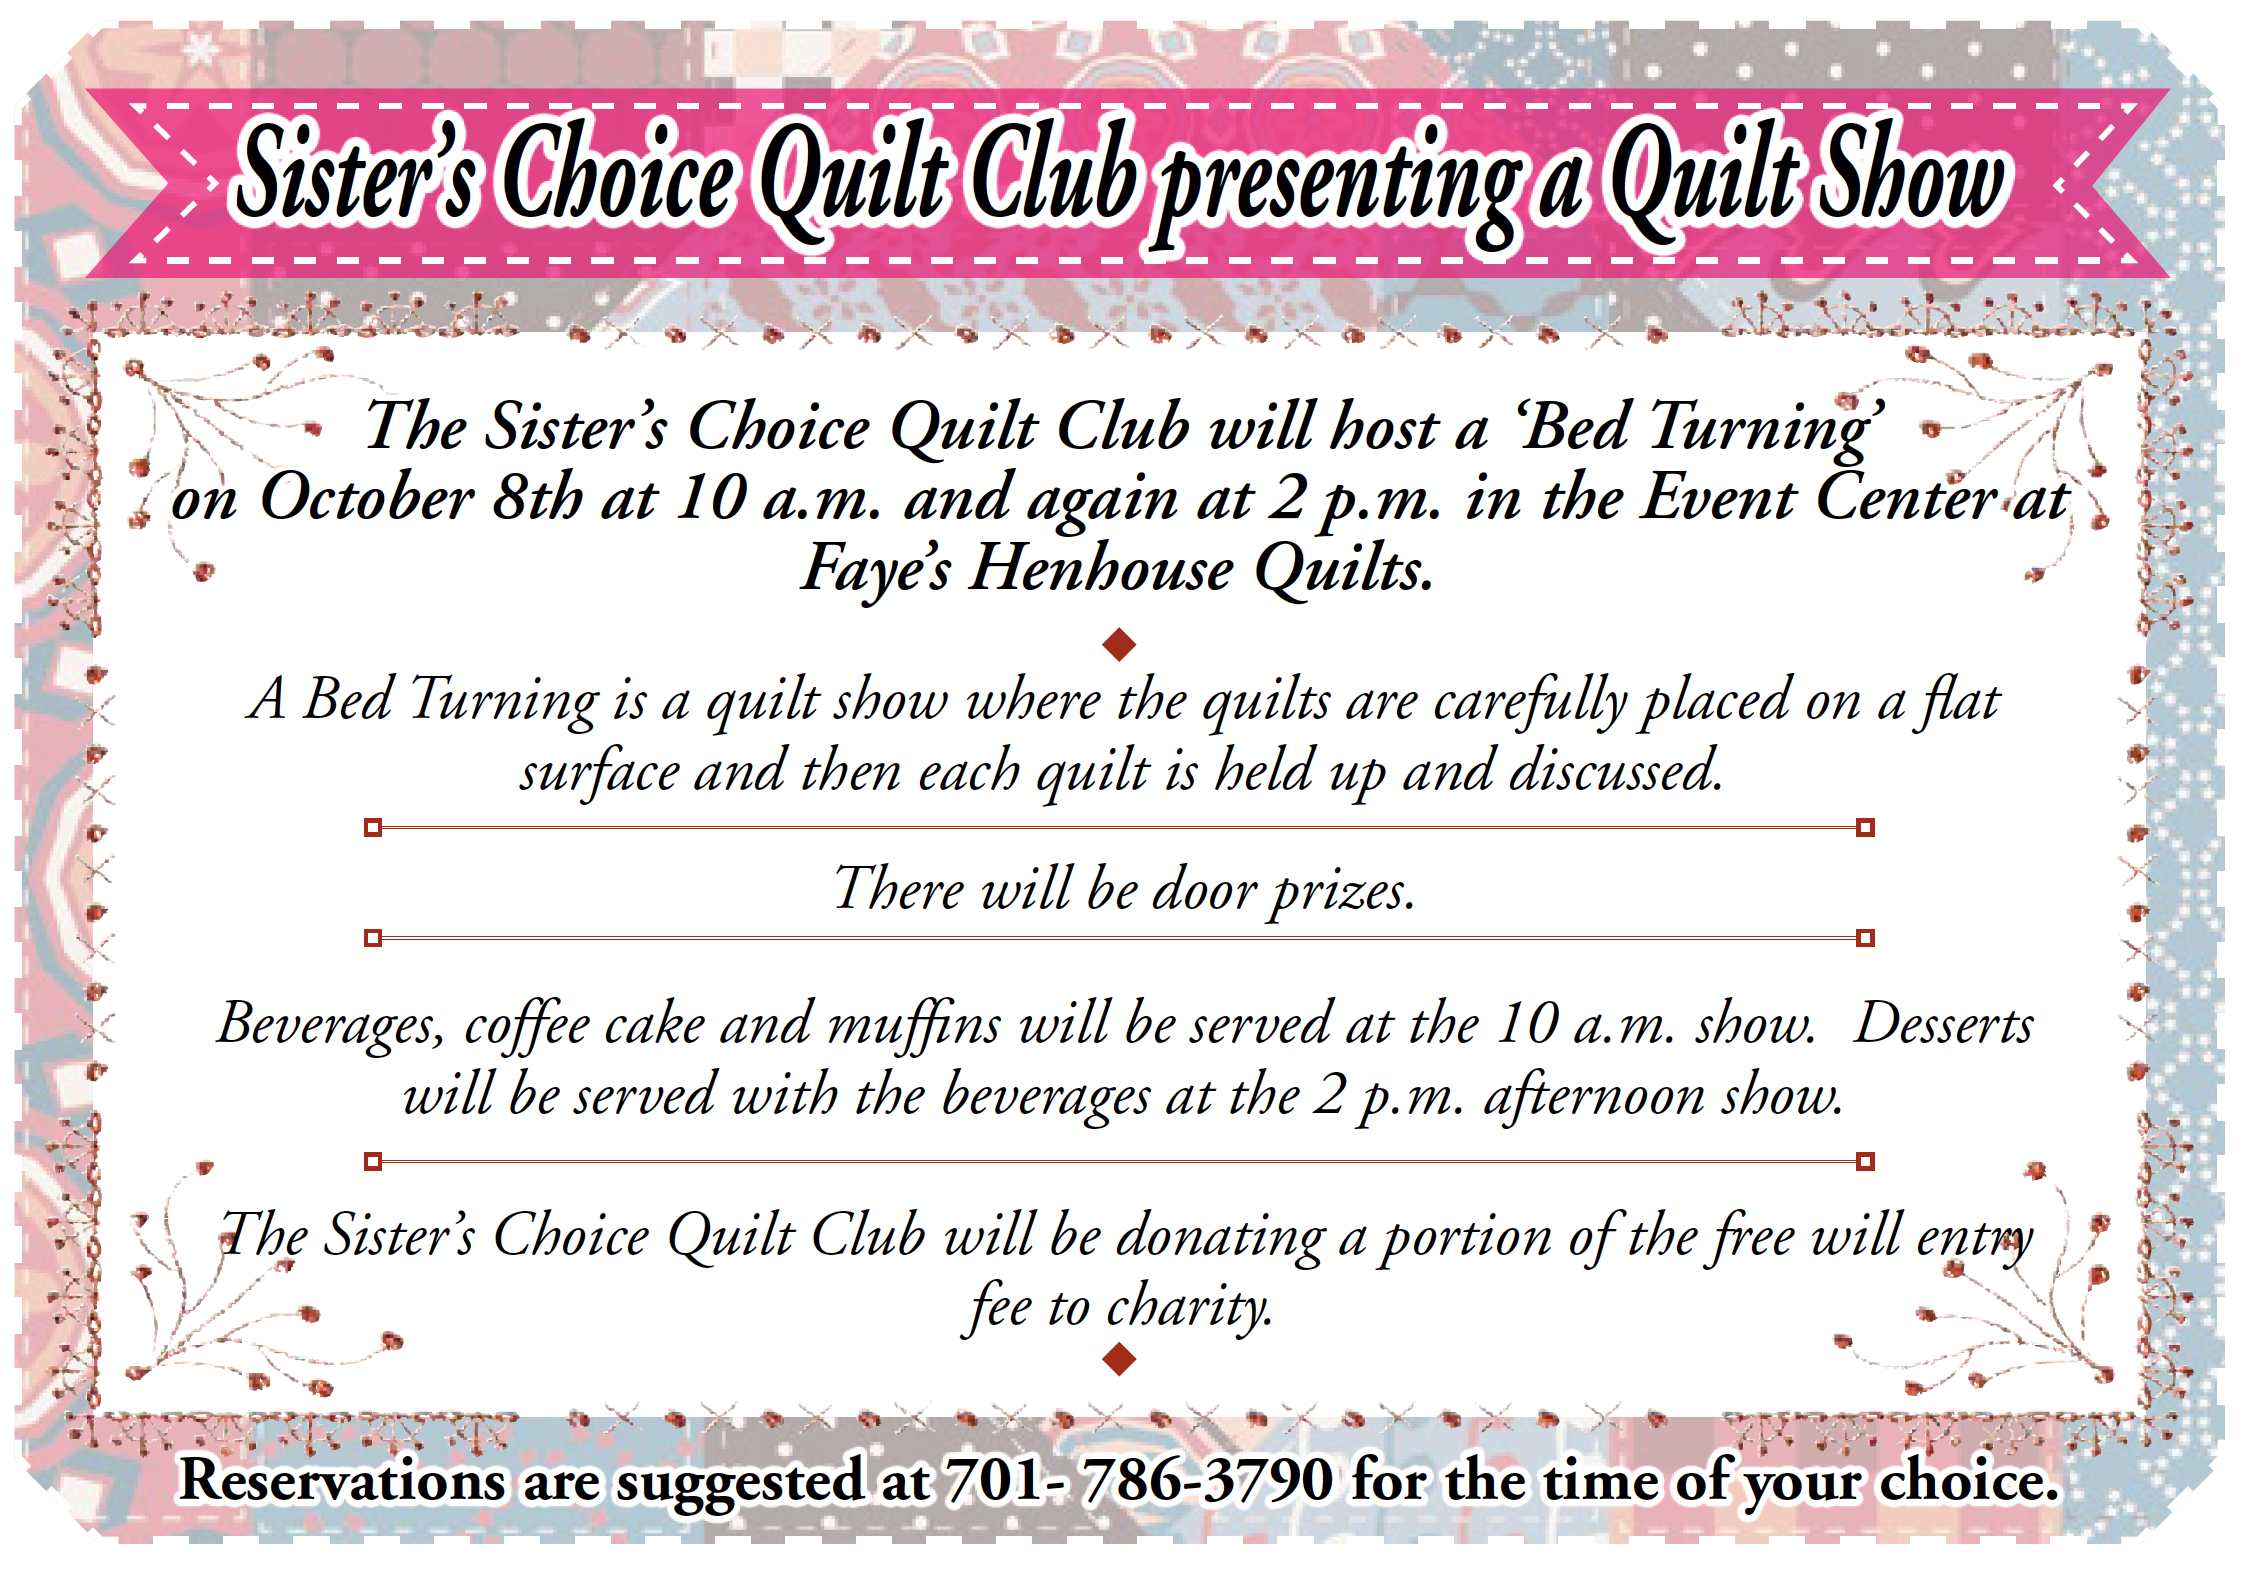 Sister's Choice Quilt Club presenting a Quilt Show @ Faye's Henhouse Quilts